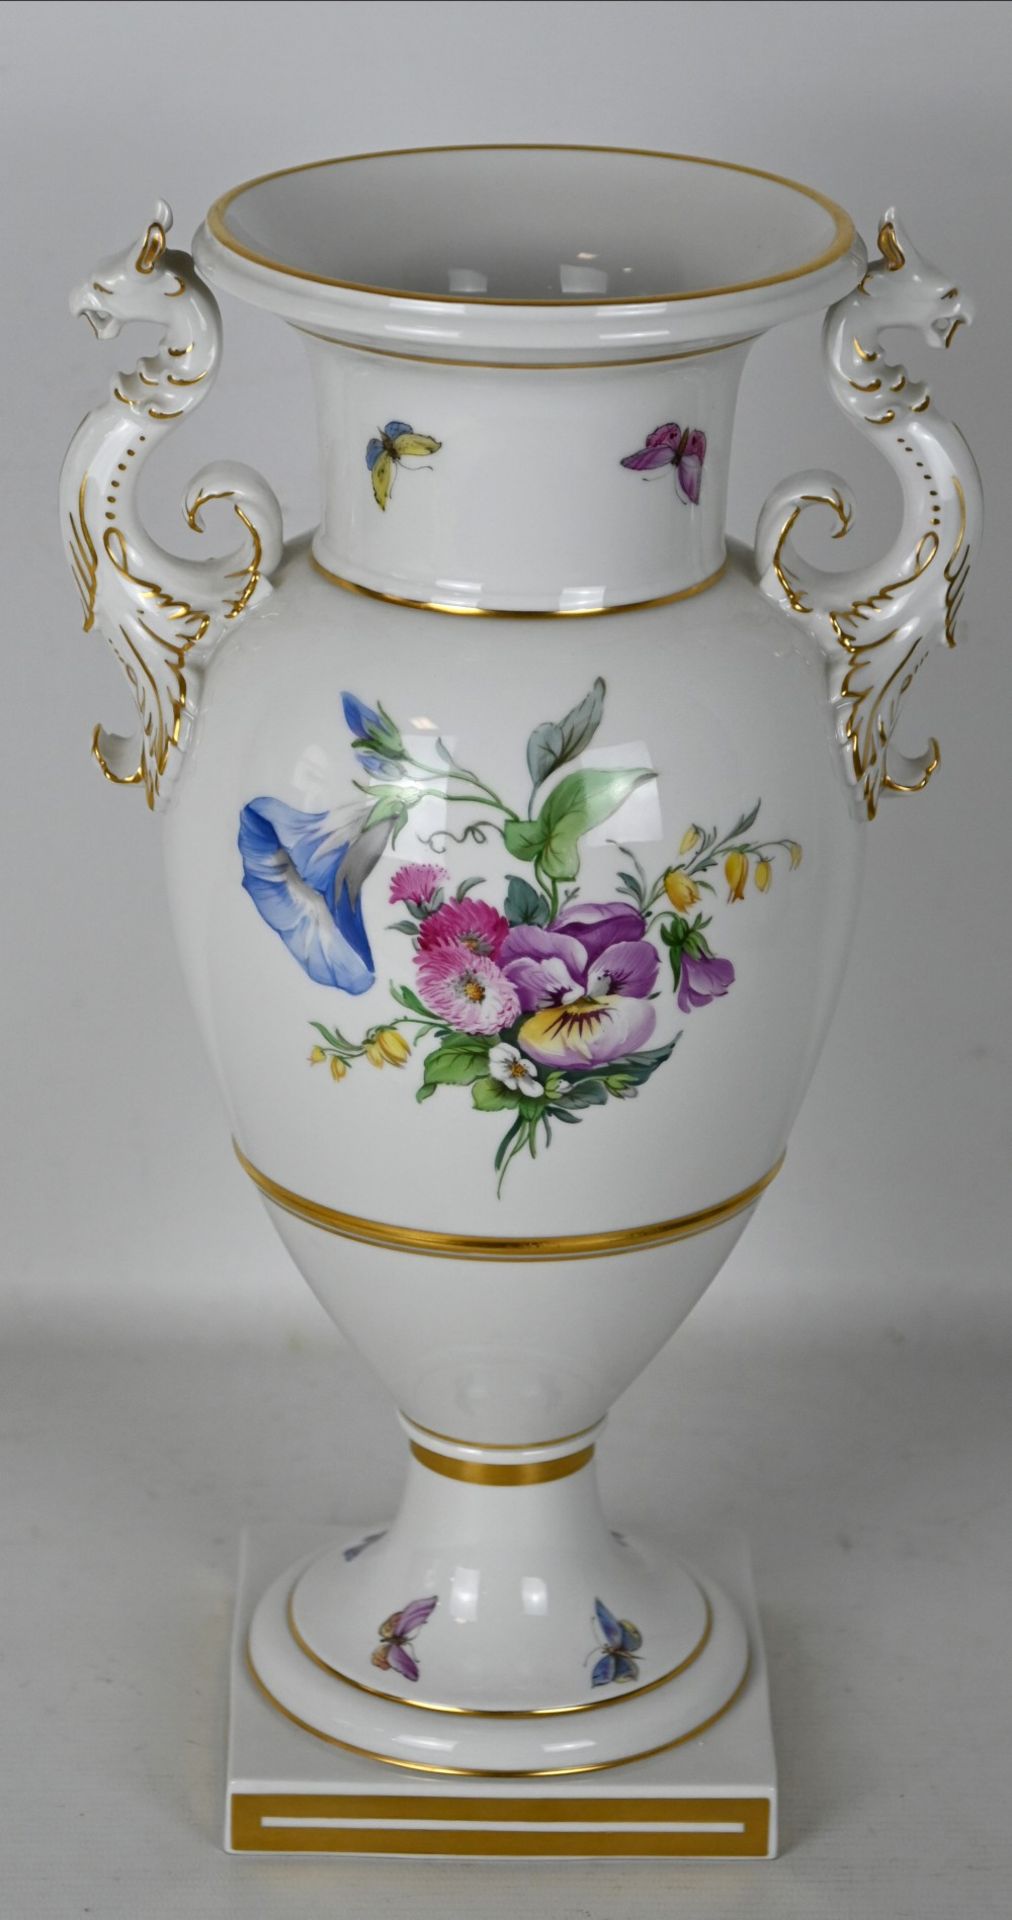 Amphora vase KPM in French style, between 1993 and 1999.